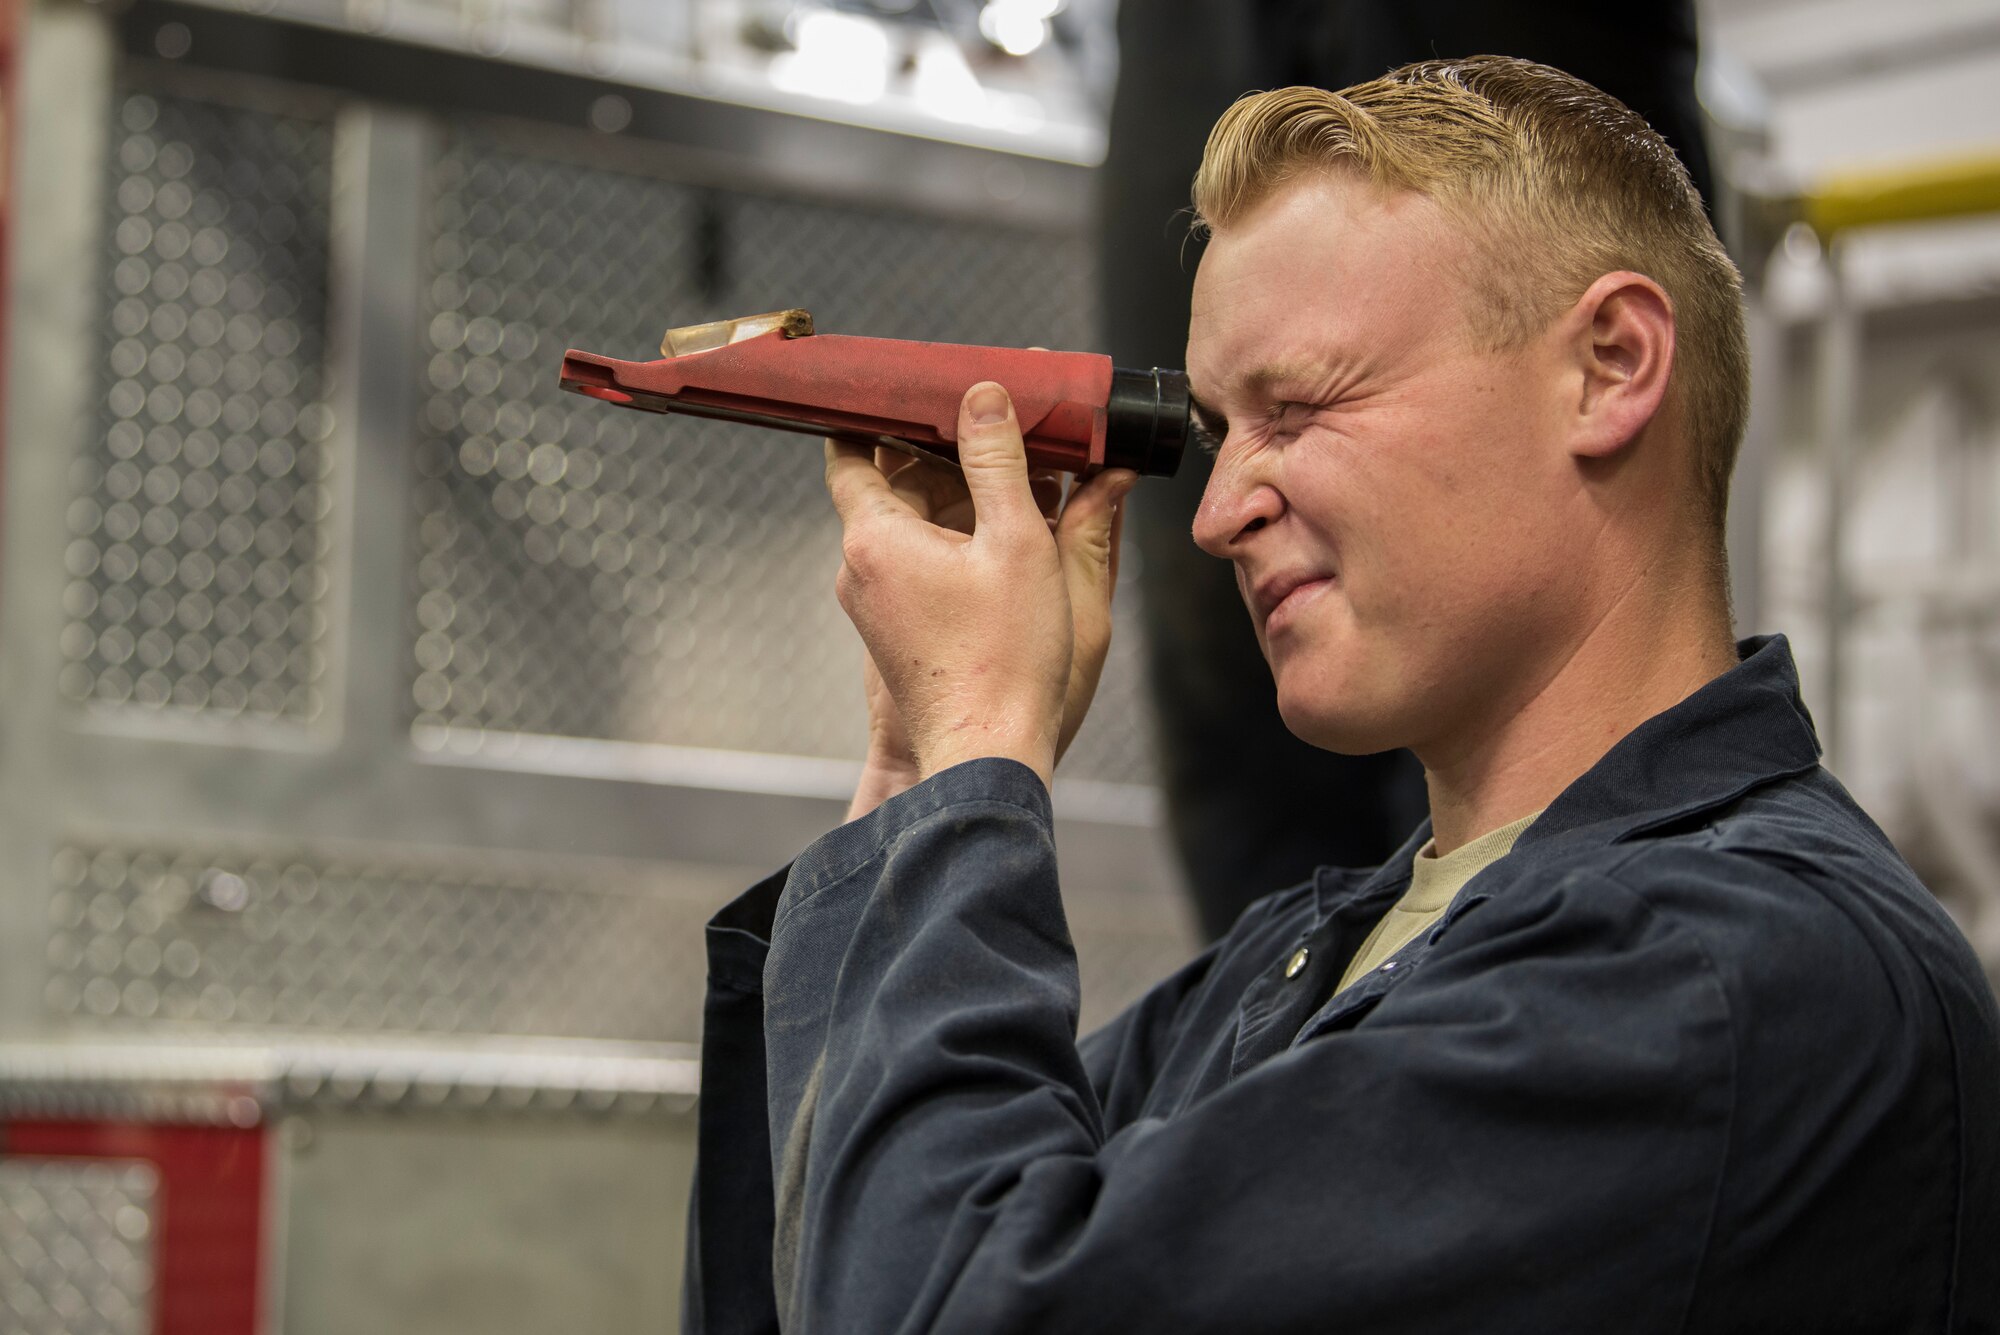 Airman 1st Class Shane Ousdahl, 673d Logistics Readiness Squadron fire truck and refueling mechanic, looks through a refractometer at Fire Station 1 on Joint Base Elmendorf-Richardson, Alaska, Sep. 17, 2018. Fire truck and refueling mechanics perform daily care on fire trucks while also following monthly and yearly maintenance checklists.